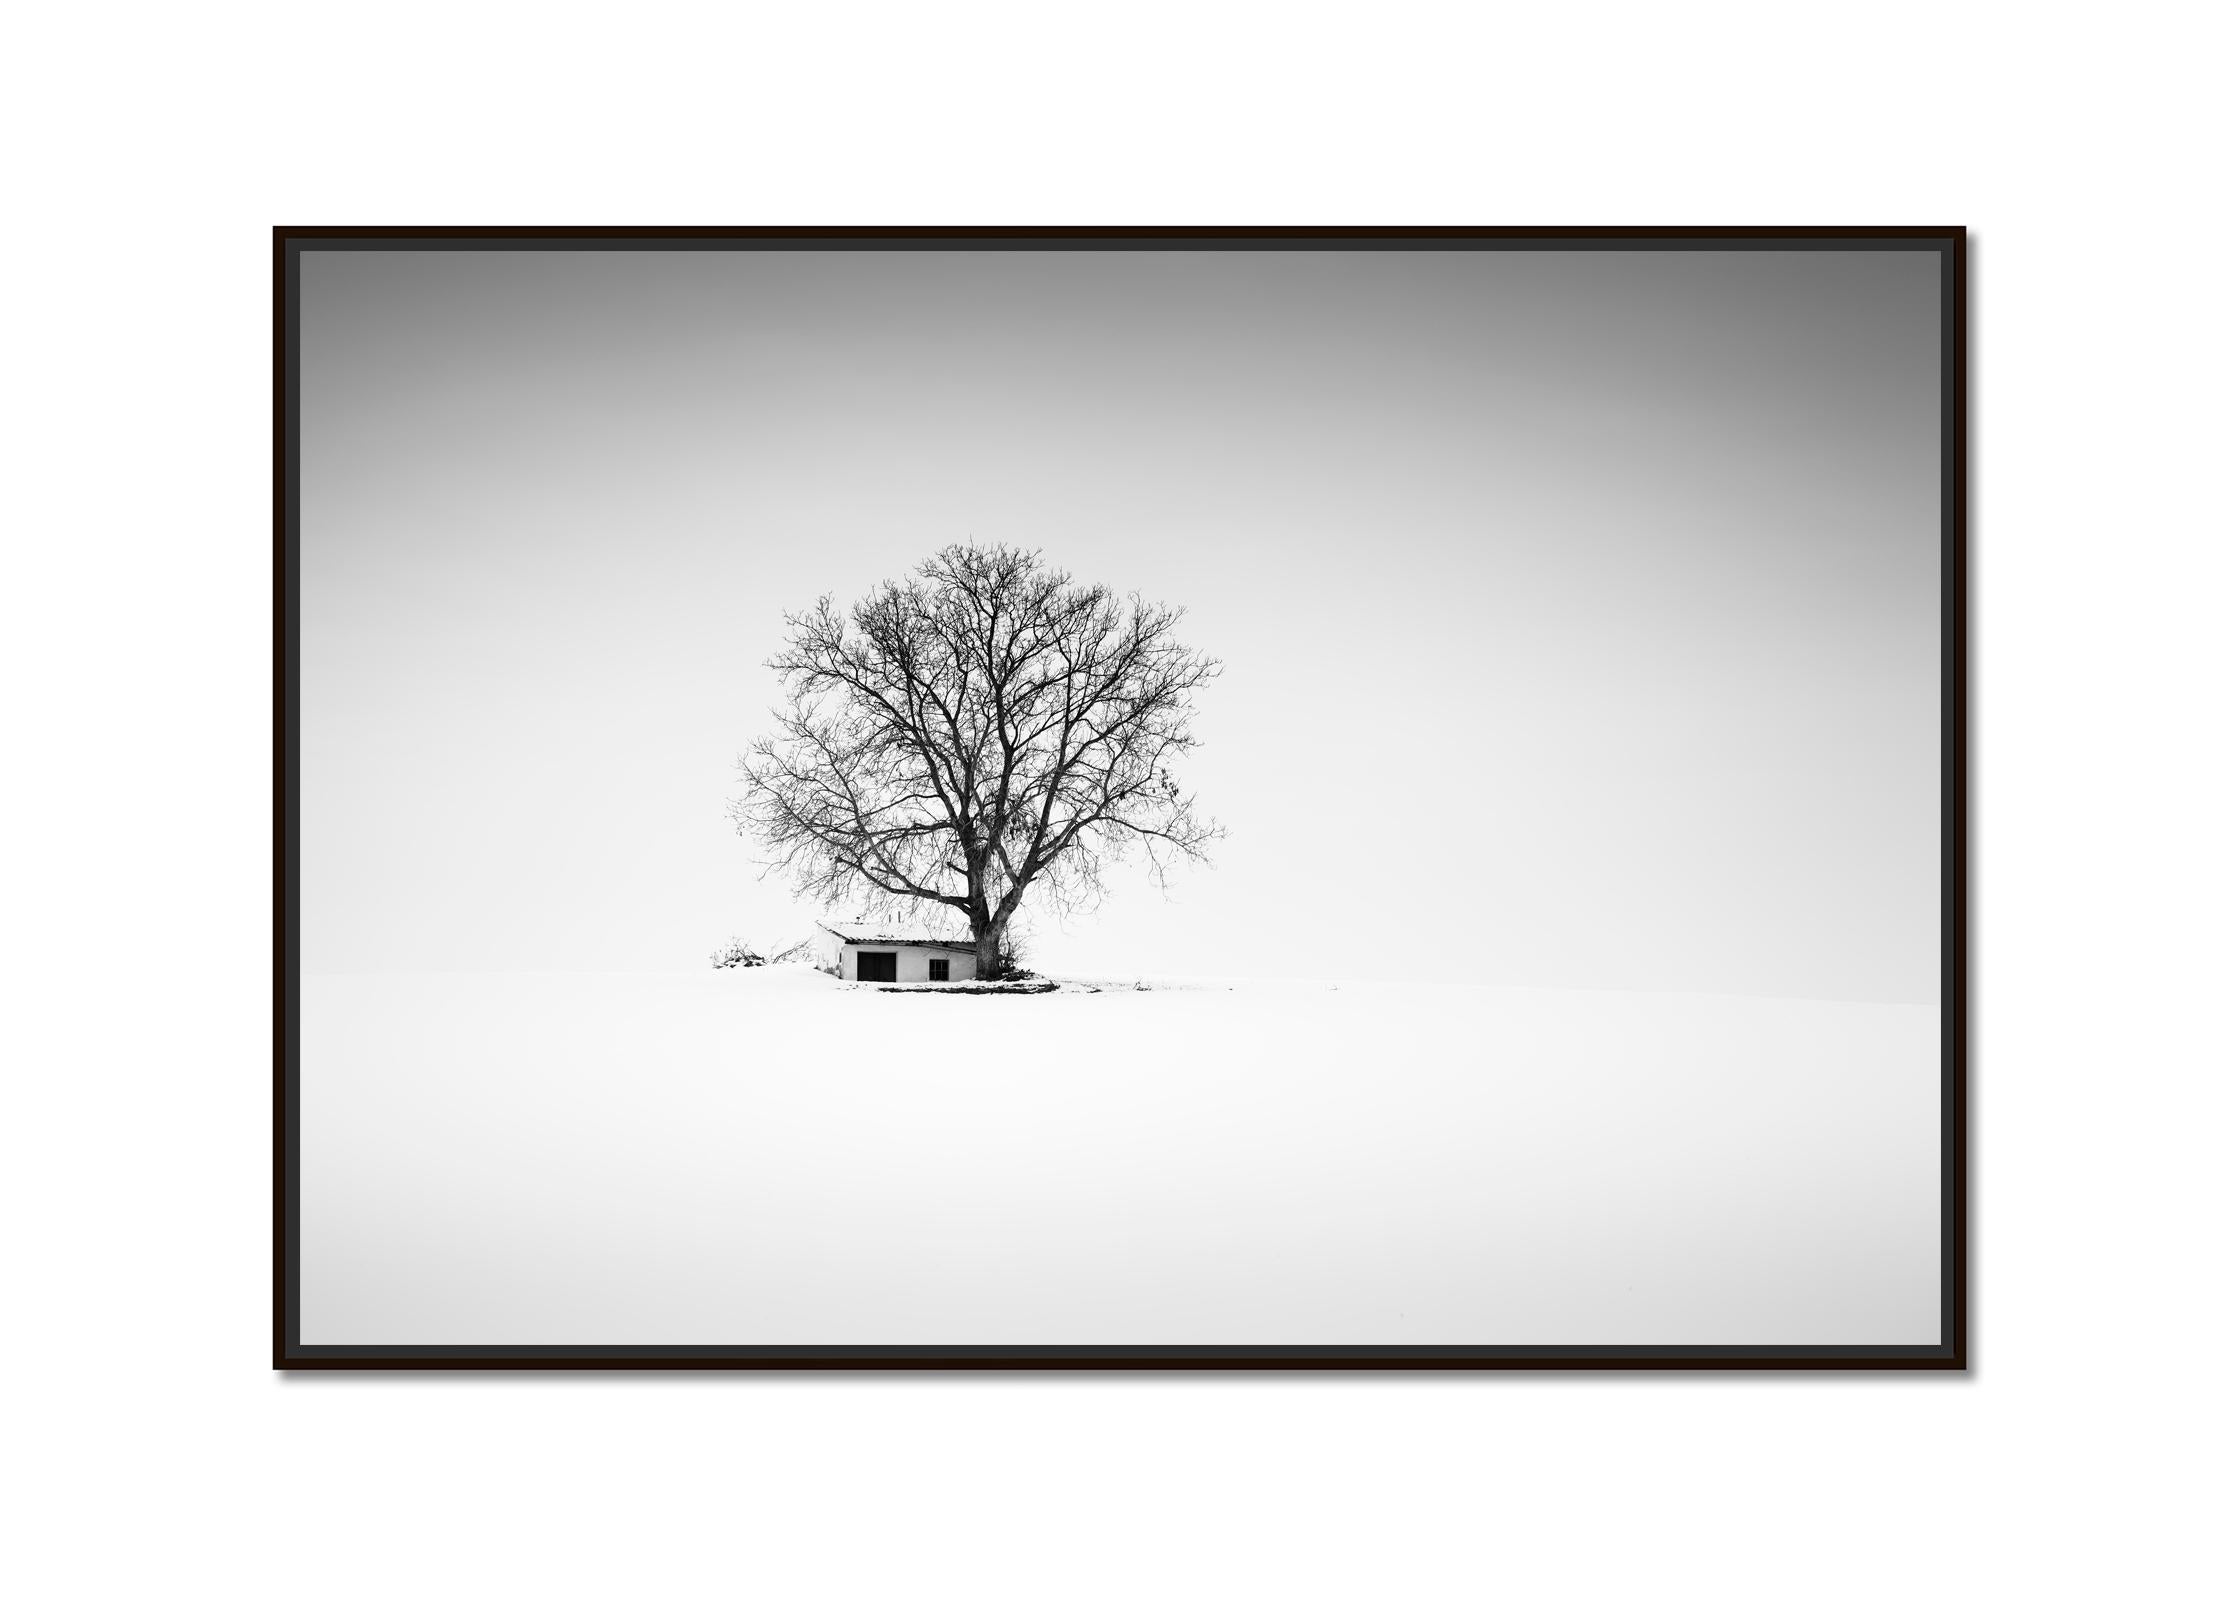 Press House, Winter, Austria, black and white photography, panorama, landscape - Photograph by Gerald Berghammer